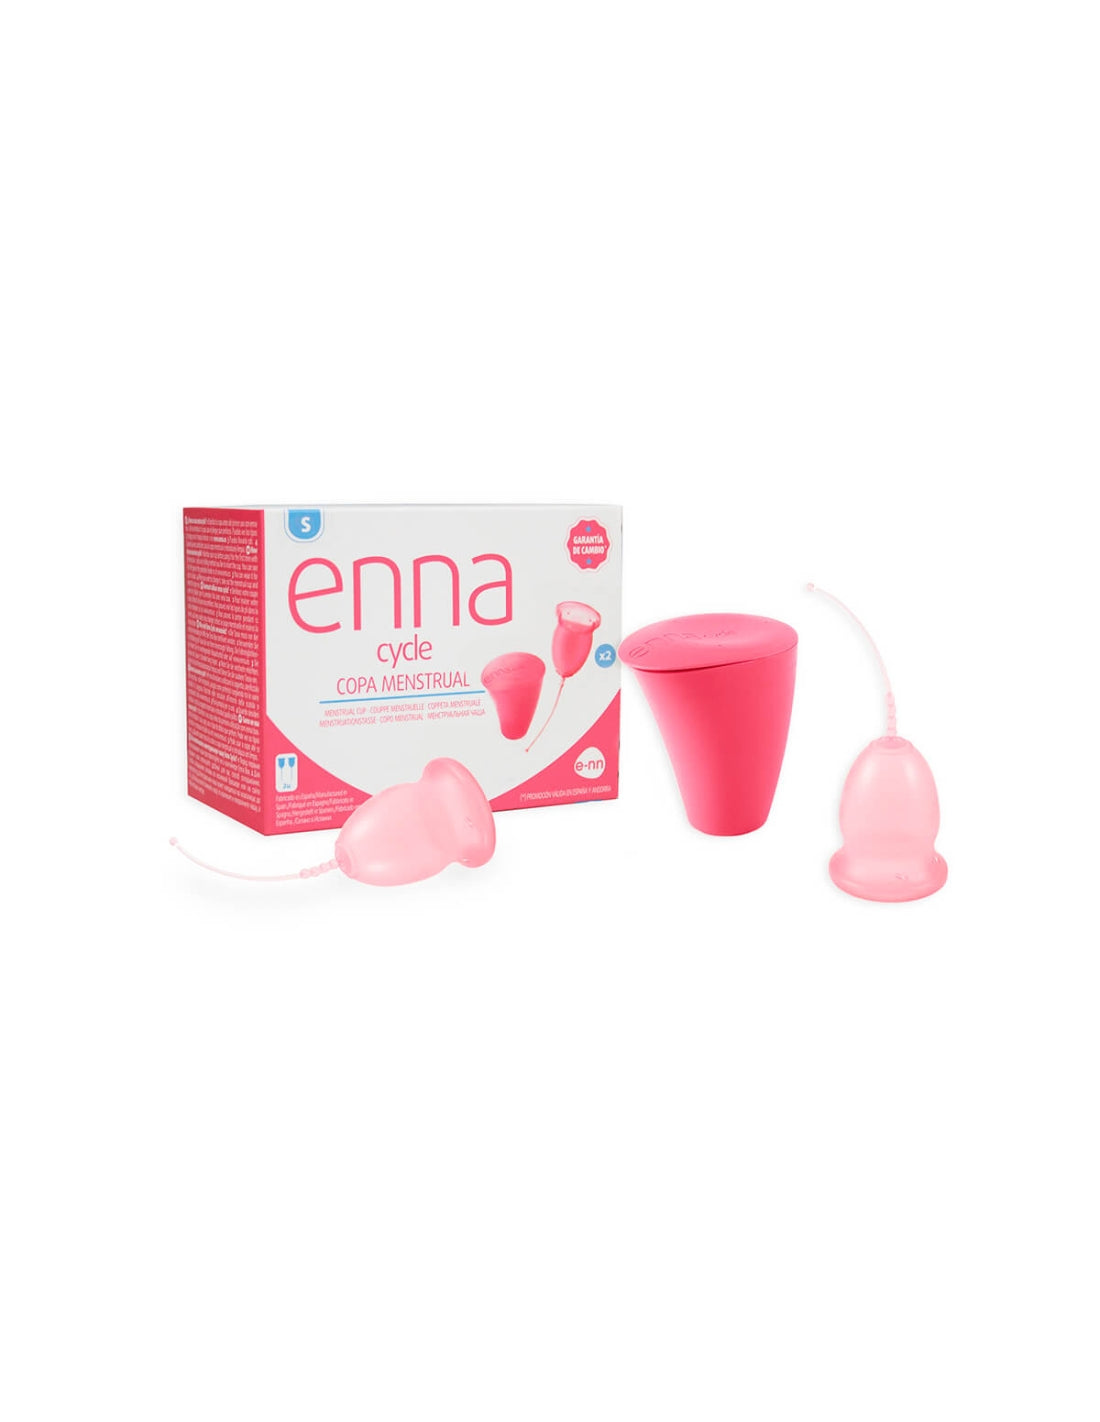 Enna Cycle 2 Menstrual Cups with Sterilizer Box 